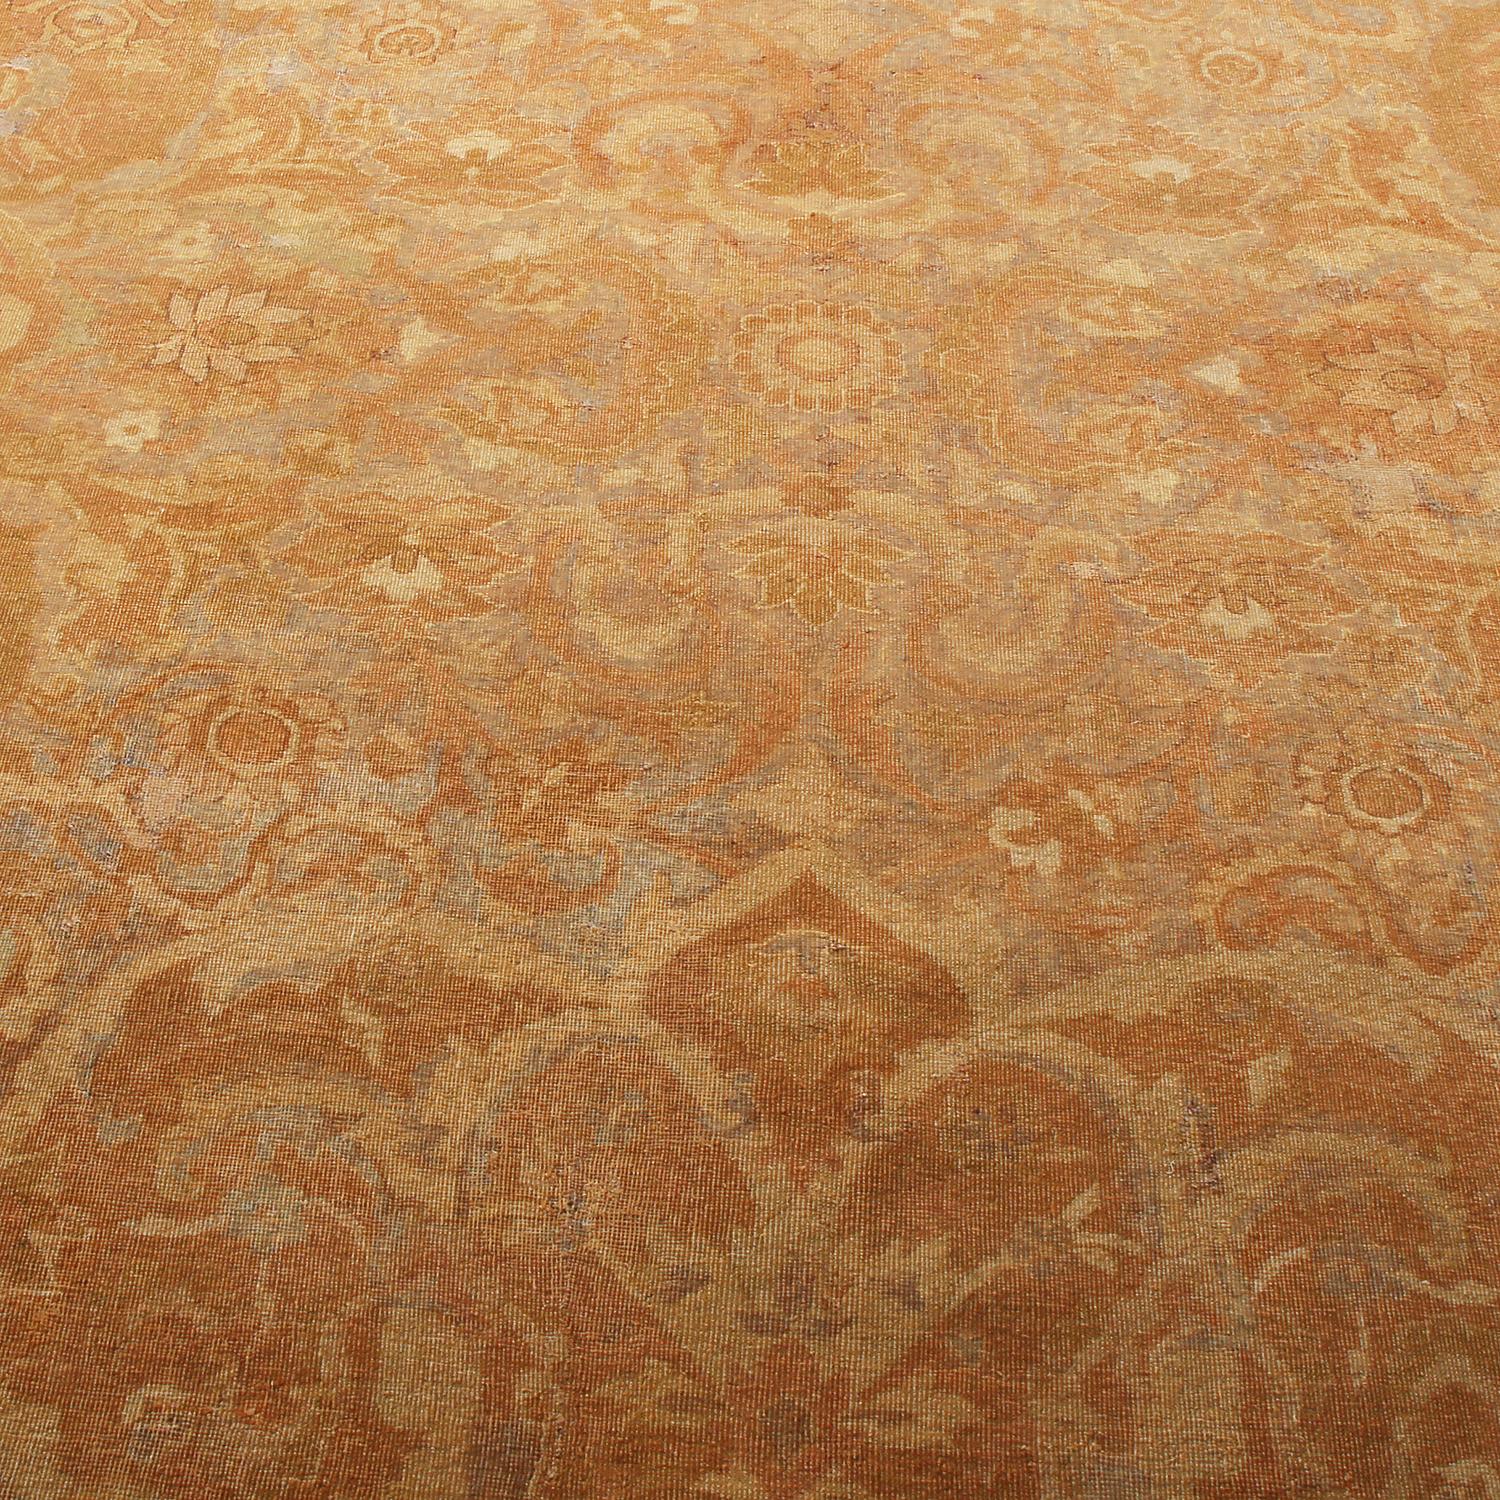 Indian Antique Amritsar Beige-Brown Wool Floral Rug with Blue Field Accents